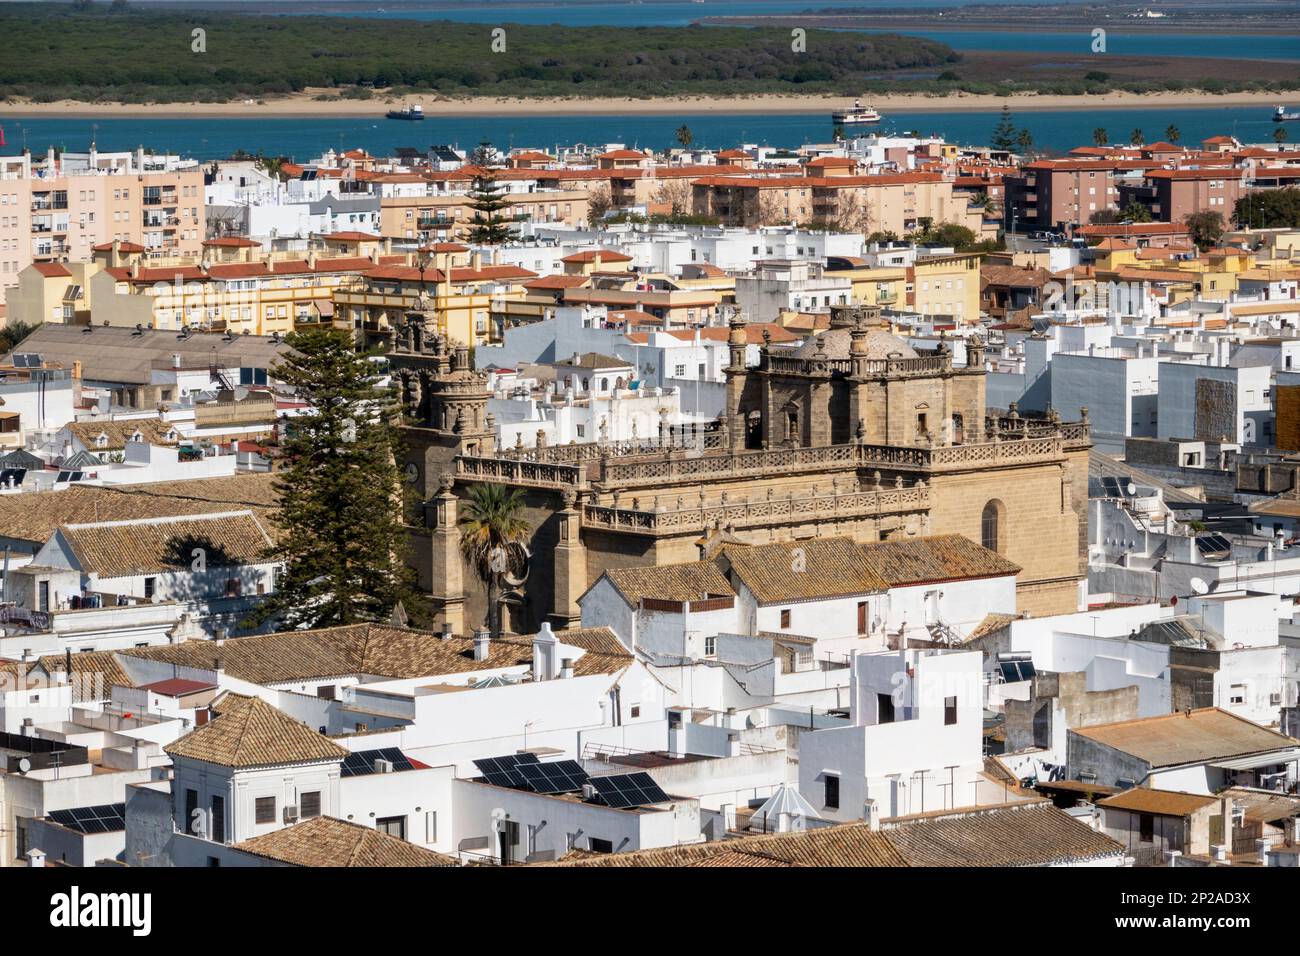 Air view of Sanlucar de Barrameda, where we can see some of its streets, houses and traditional buildings. Tourist village of Cadiz province, Spain Stock Photo